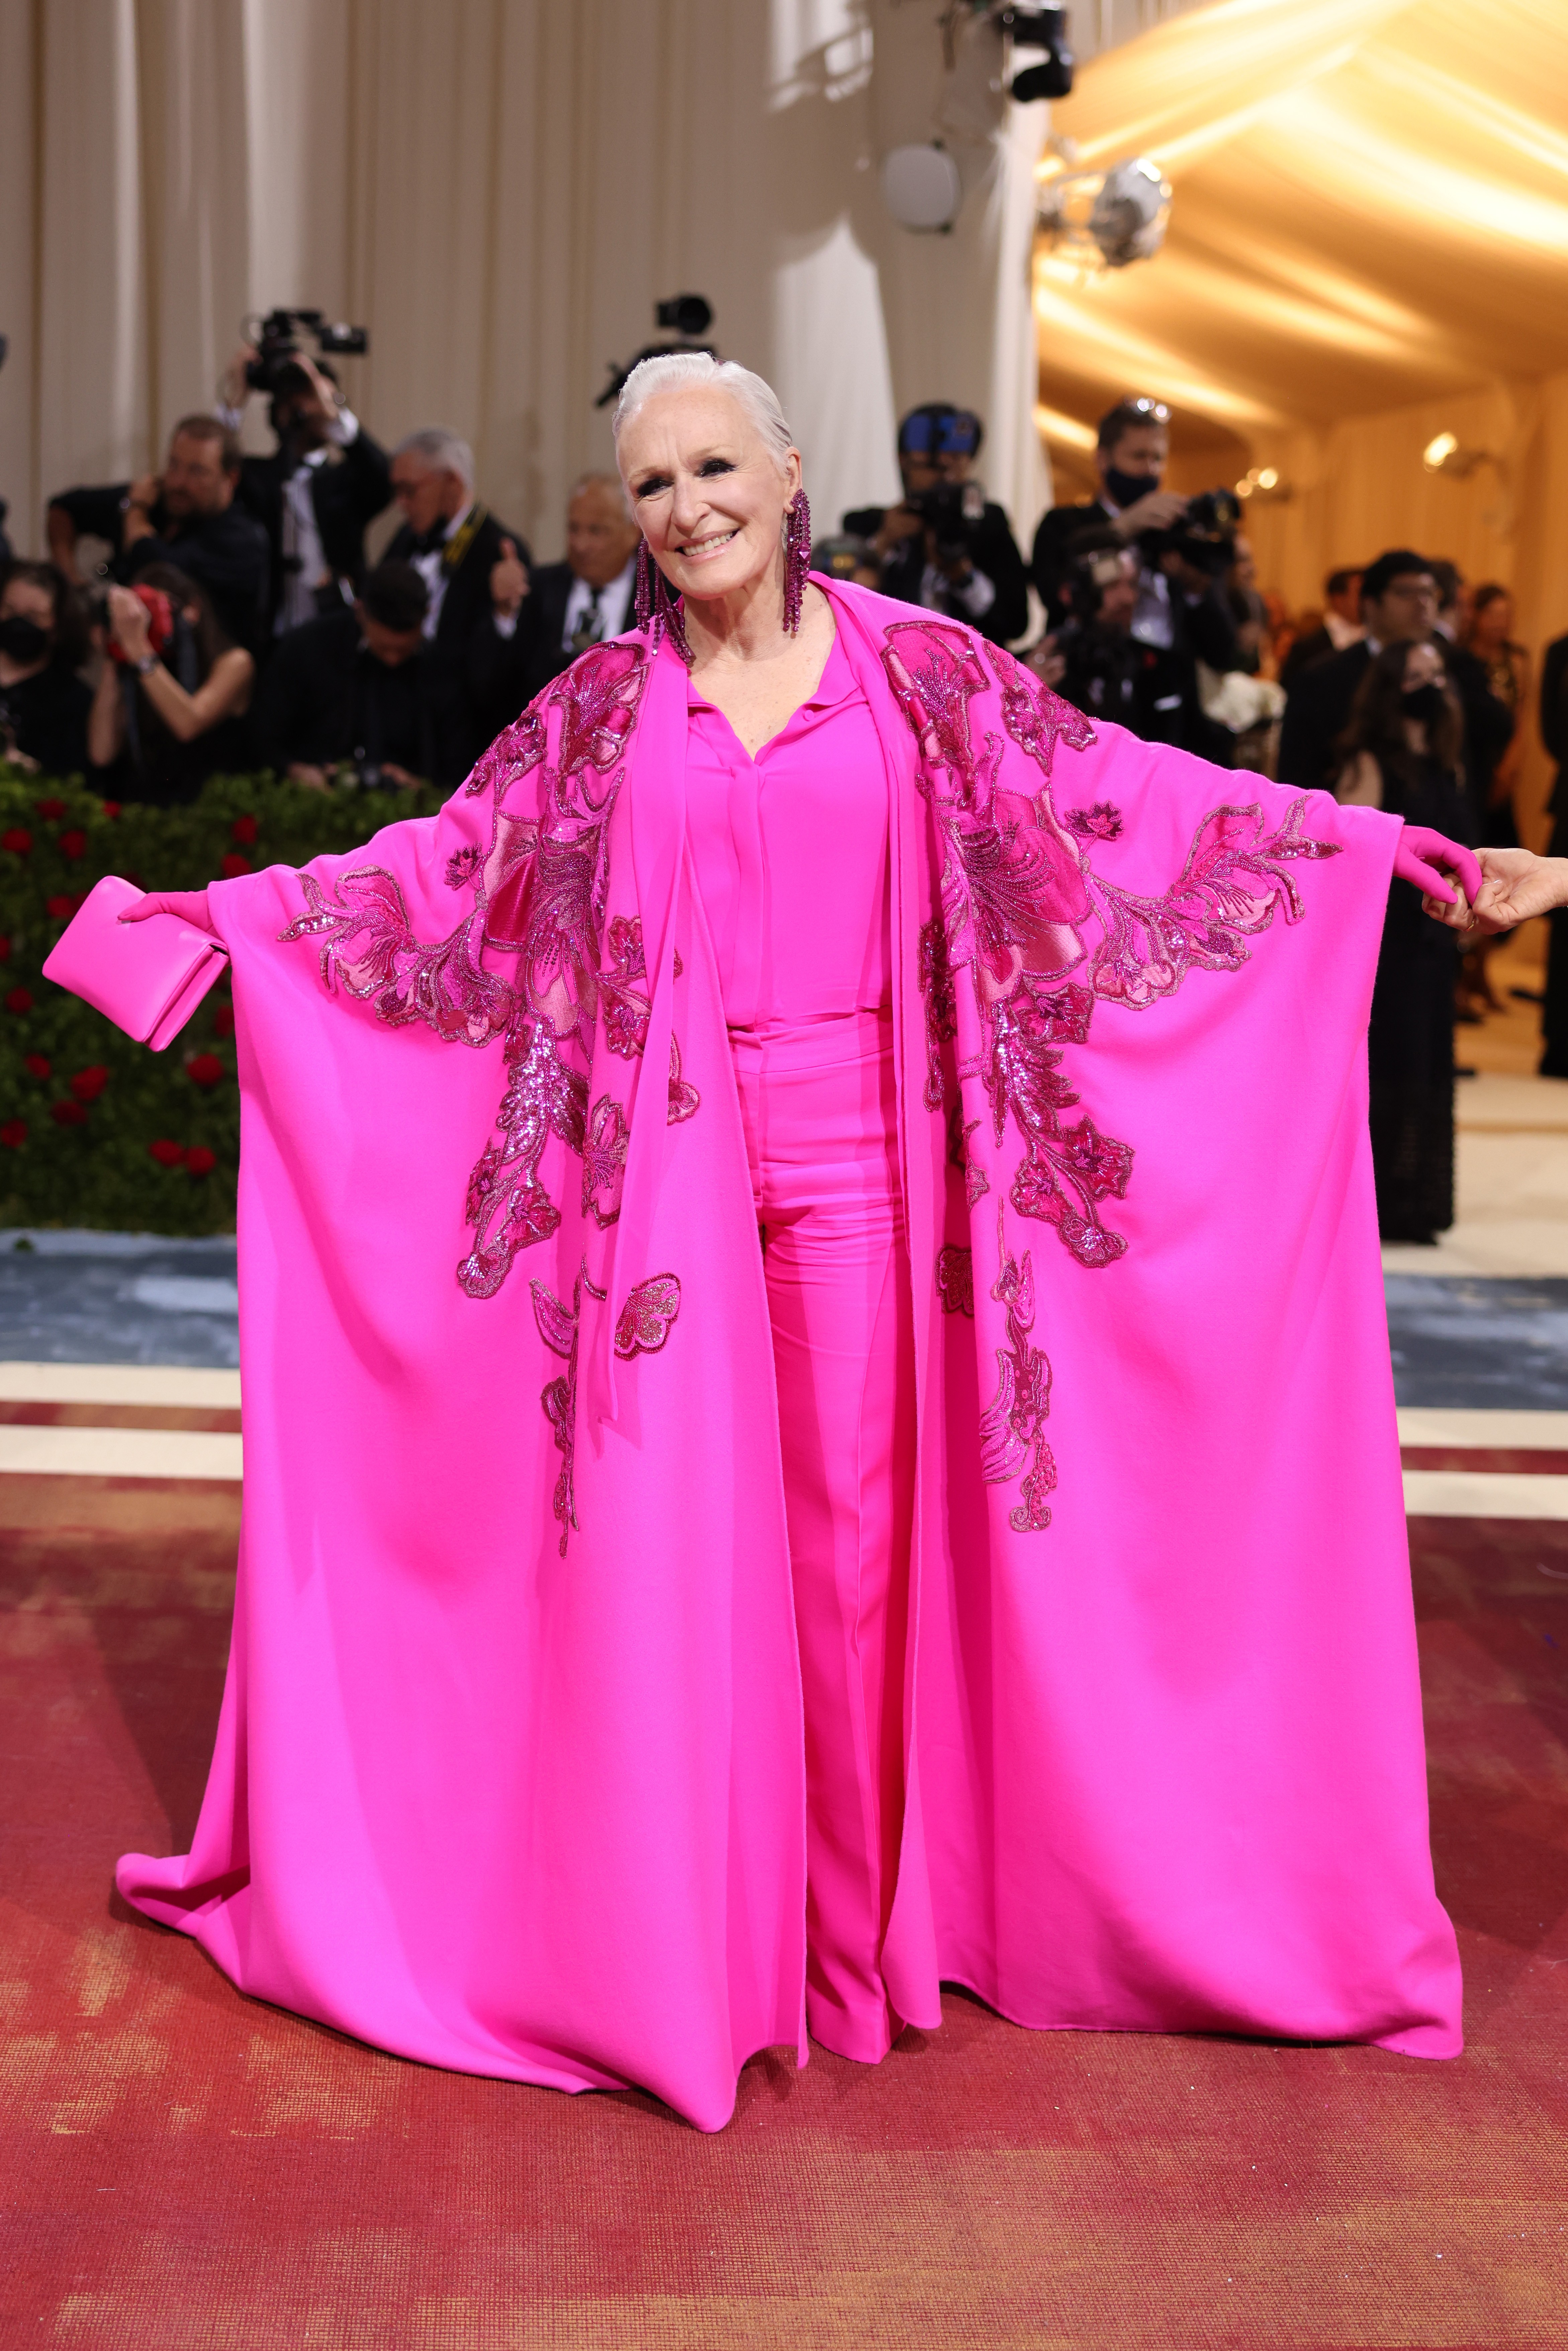 NEW YORK, NEW YORK - MAY 02: Glenn Close attends The 2022 Met Gala Celebrating "In America: An Anthology of Fashion" at The Metropolitan Museum of Art on May 02, 2022 in New York City. (Photo by John Shearer/Getty Images) (Foto: Getty Images)